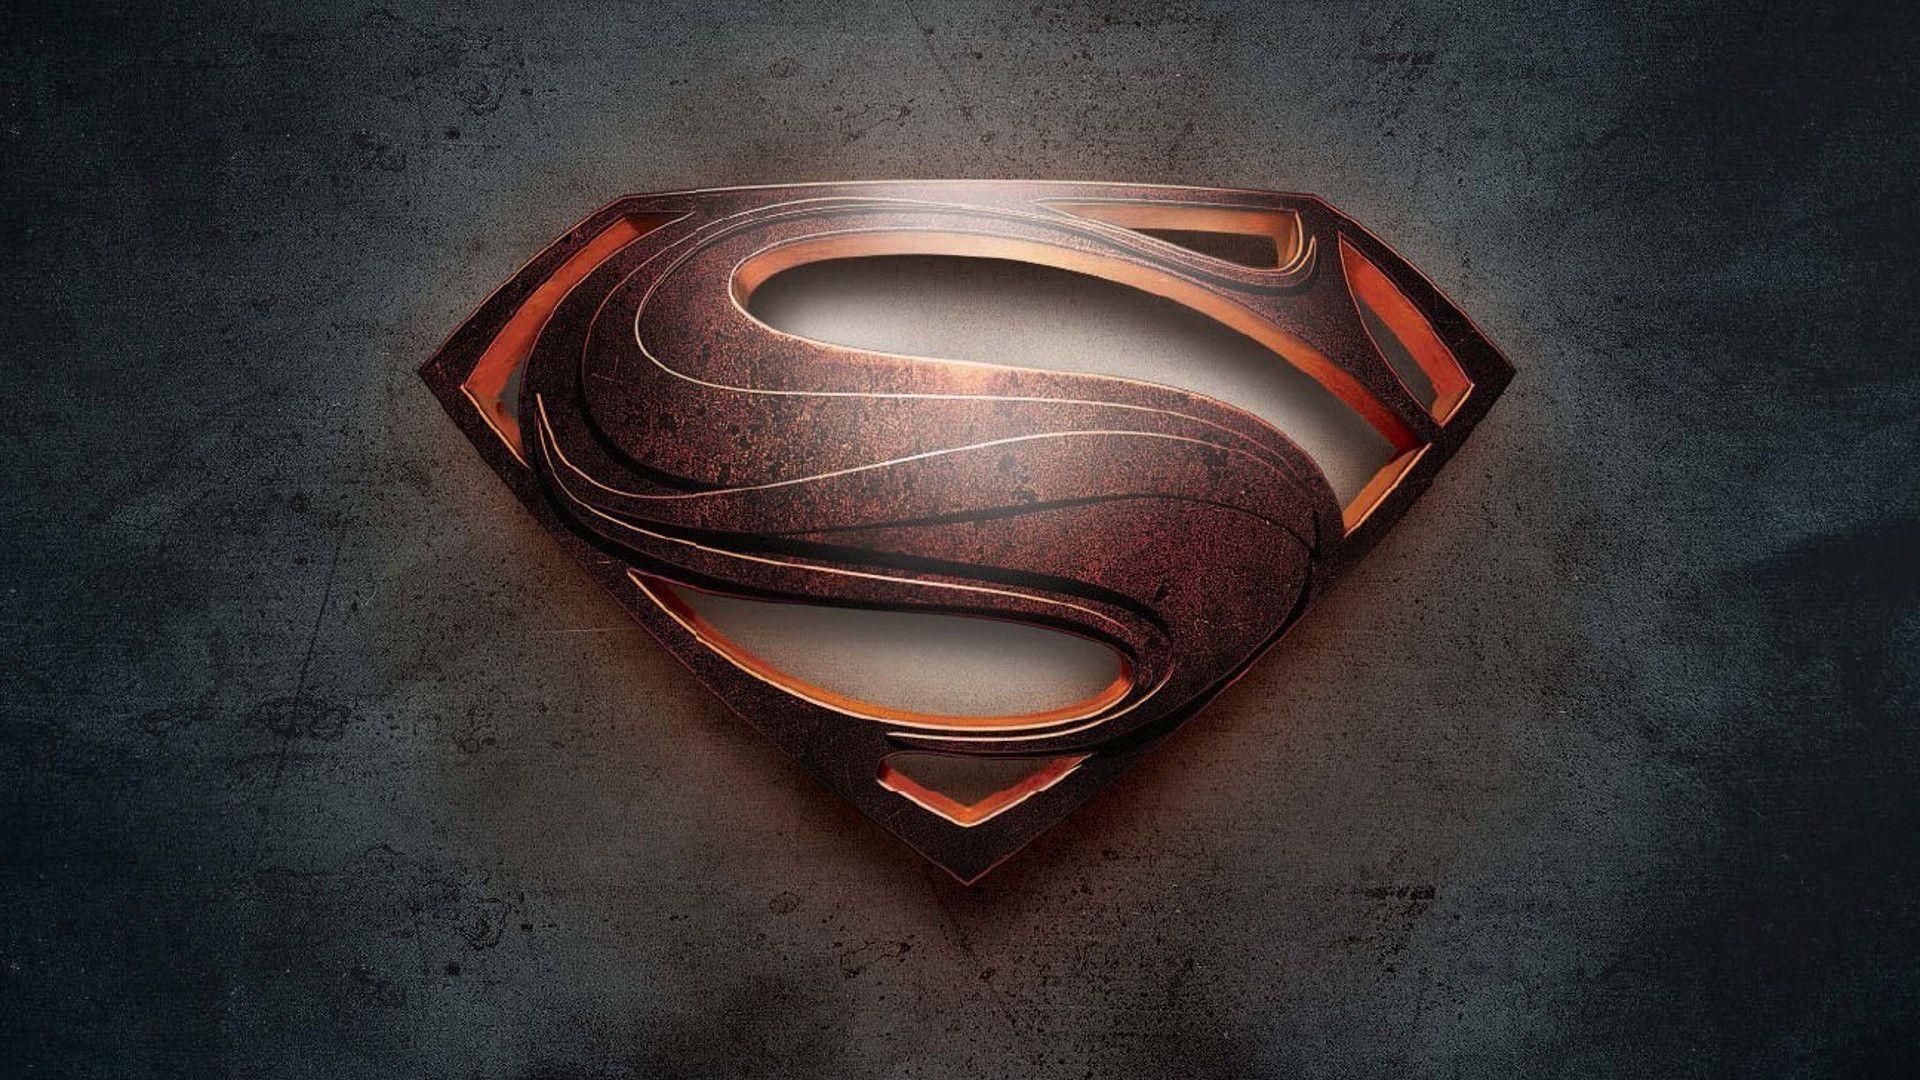 Superman HD Wallpaper for Android